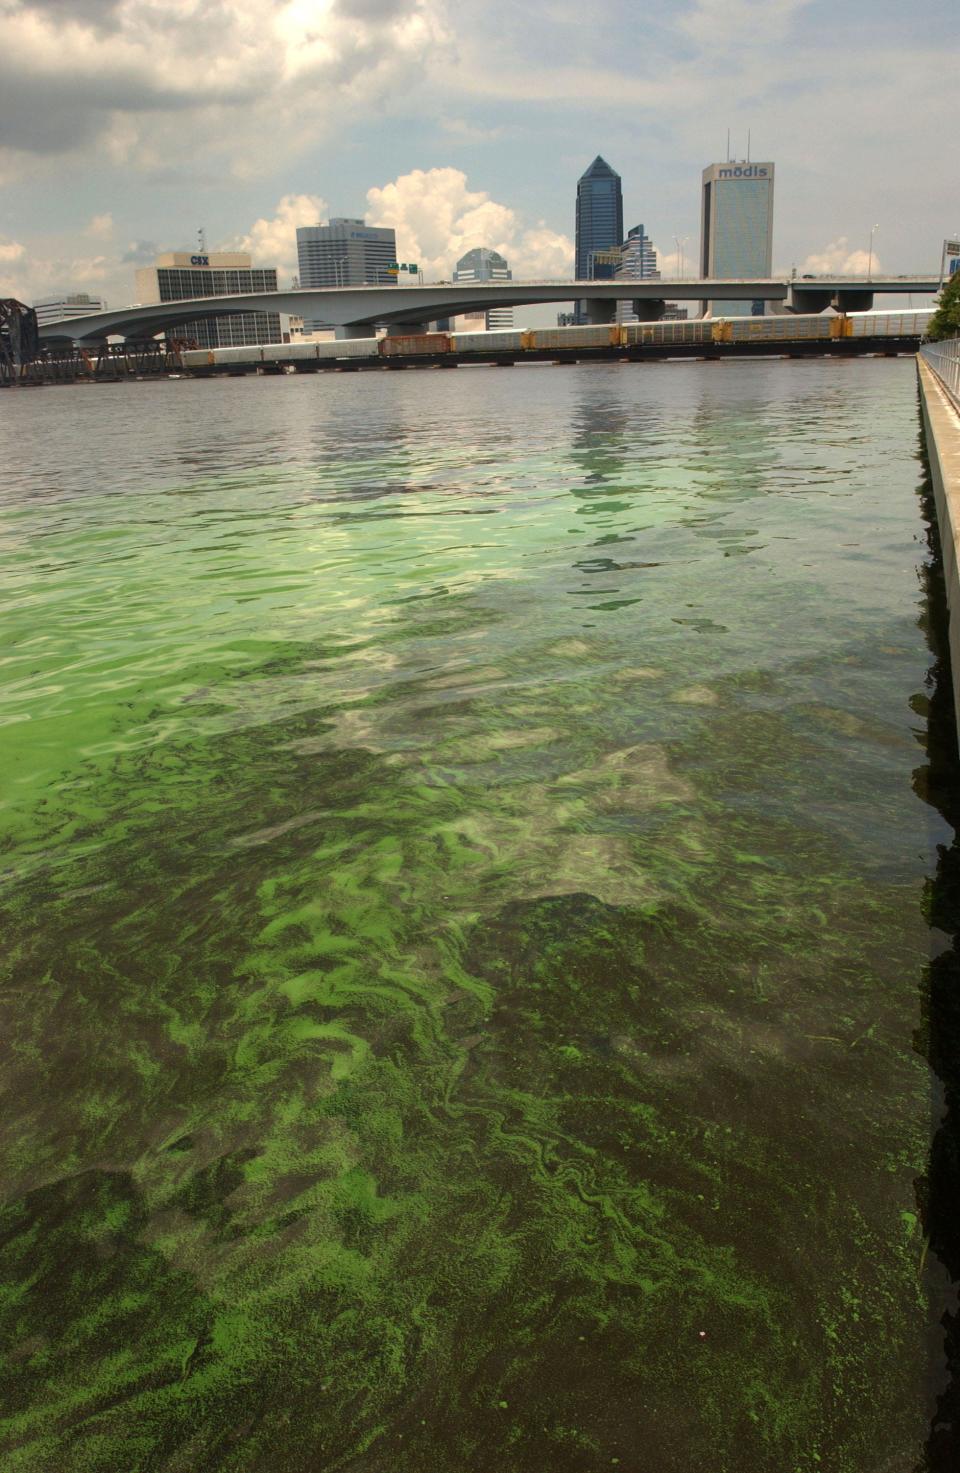 Algae covers the St. Johns River in this 2005 photo of downtown Jacksonville. Similar algae blooms, some containing toxins, have appeared repeatedly for many years.